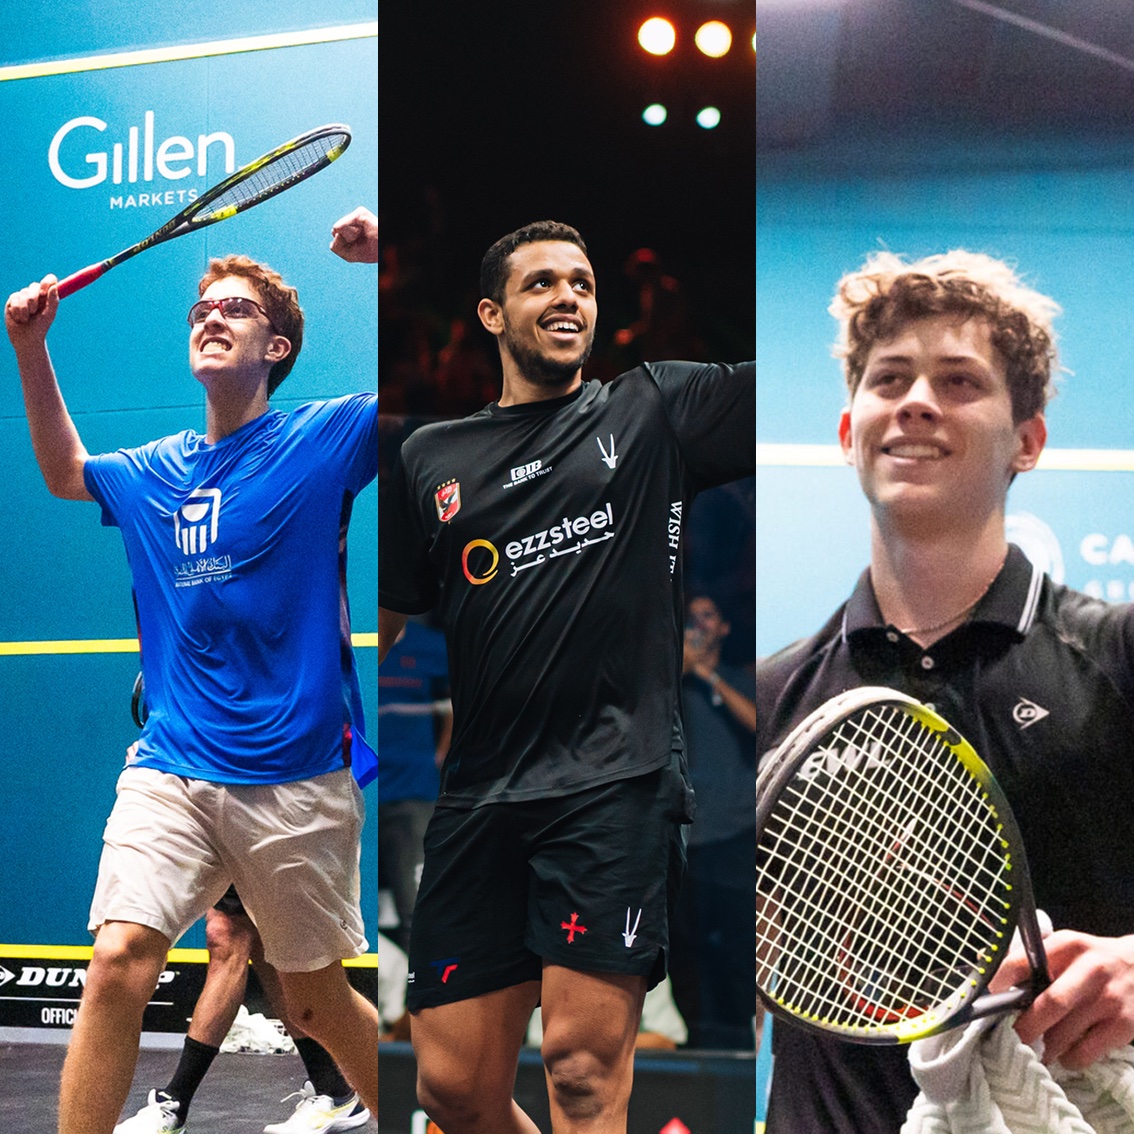 Voting is now 𝗼𝗽𝗲𝗻 for the PSA Men’s Young Player of the Year award 🏆 @mostafasal_ 🇪🇬 Jonah Bryant 🏴󠁧󠁢󠁥󠁮󠁧󠁿 Mohamad Zakaria 🇪🇬 Click the link below to cast your vote 🗳 rb.gy/x3d2h2